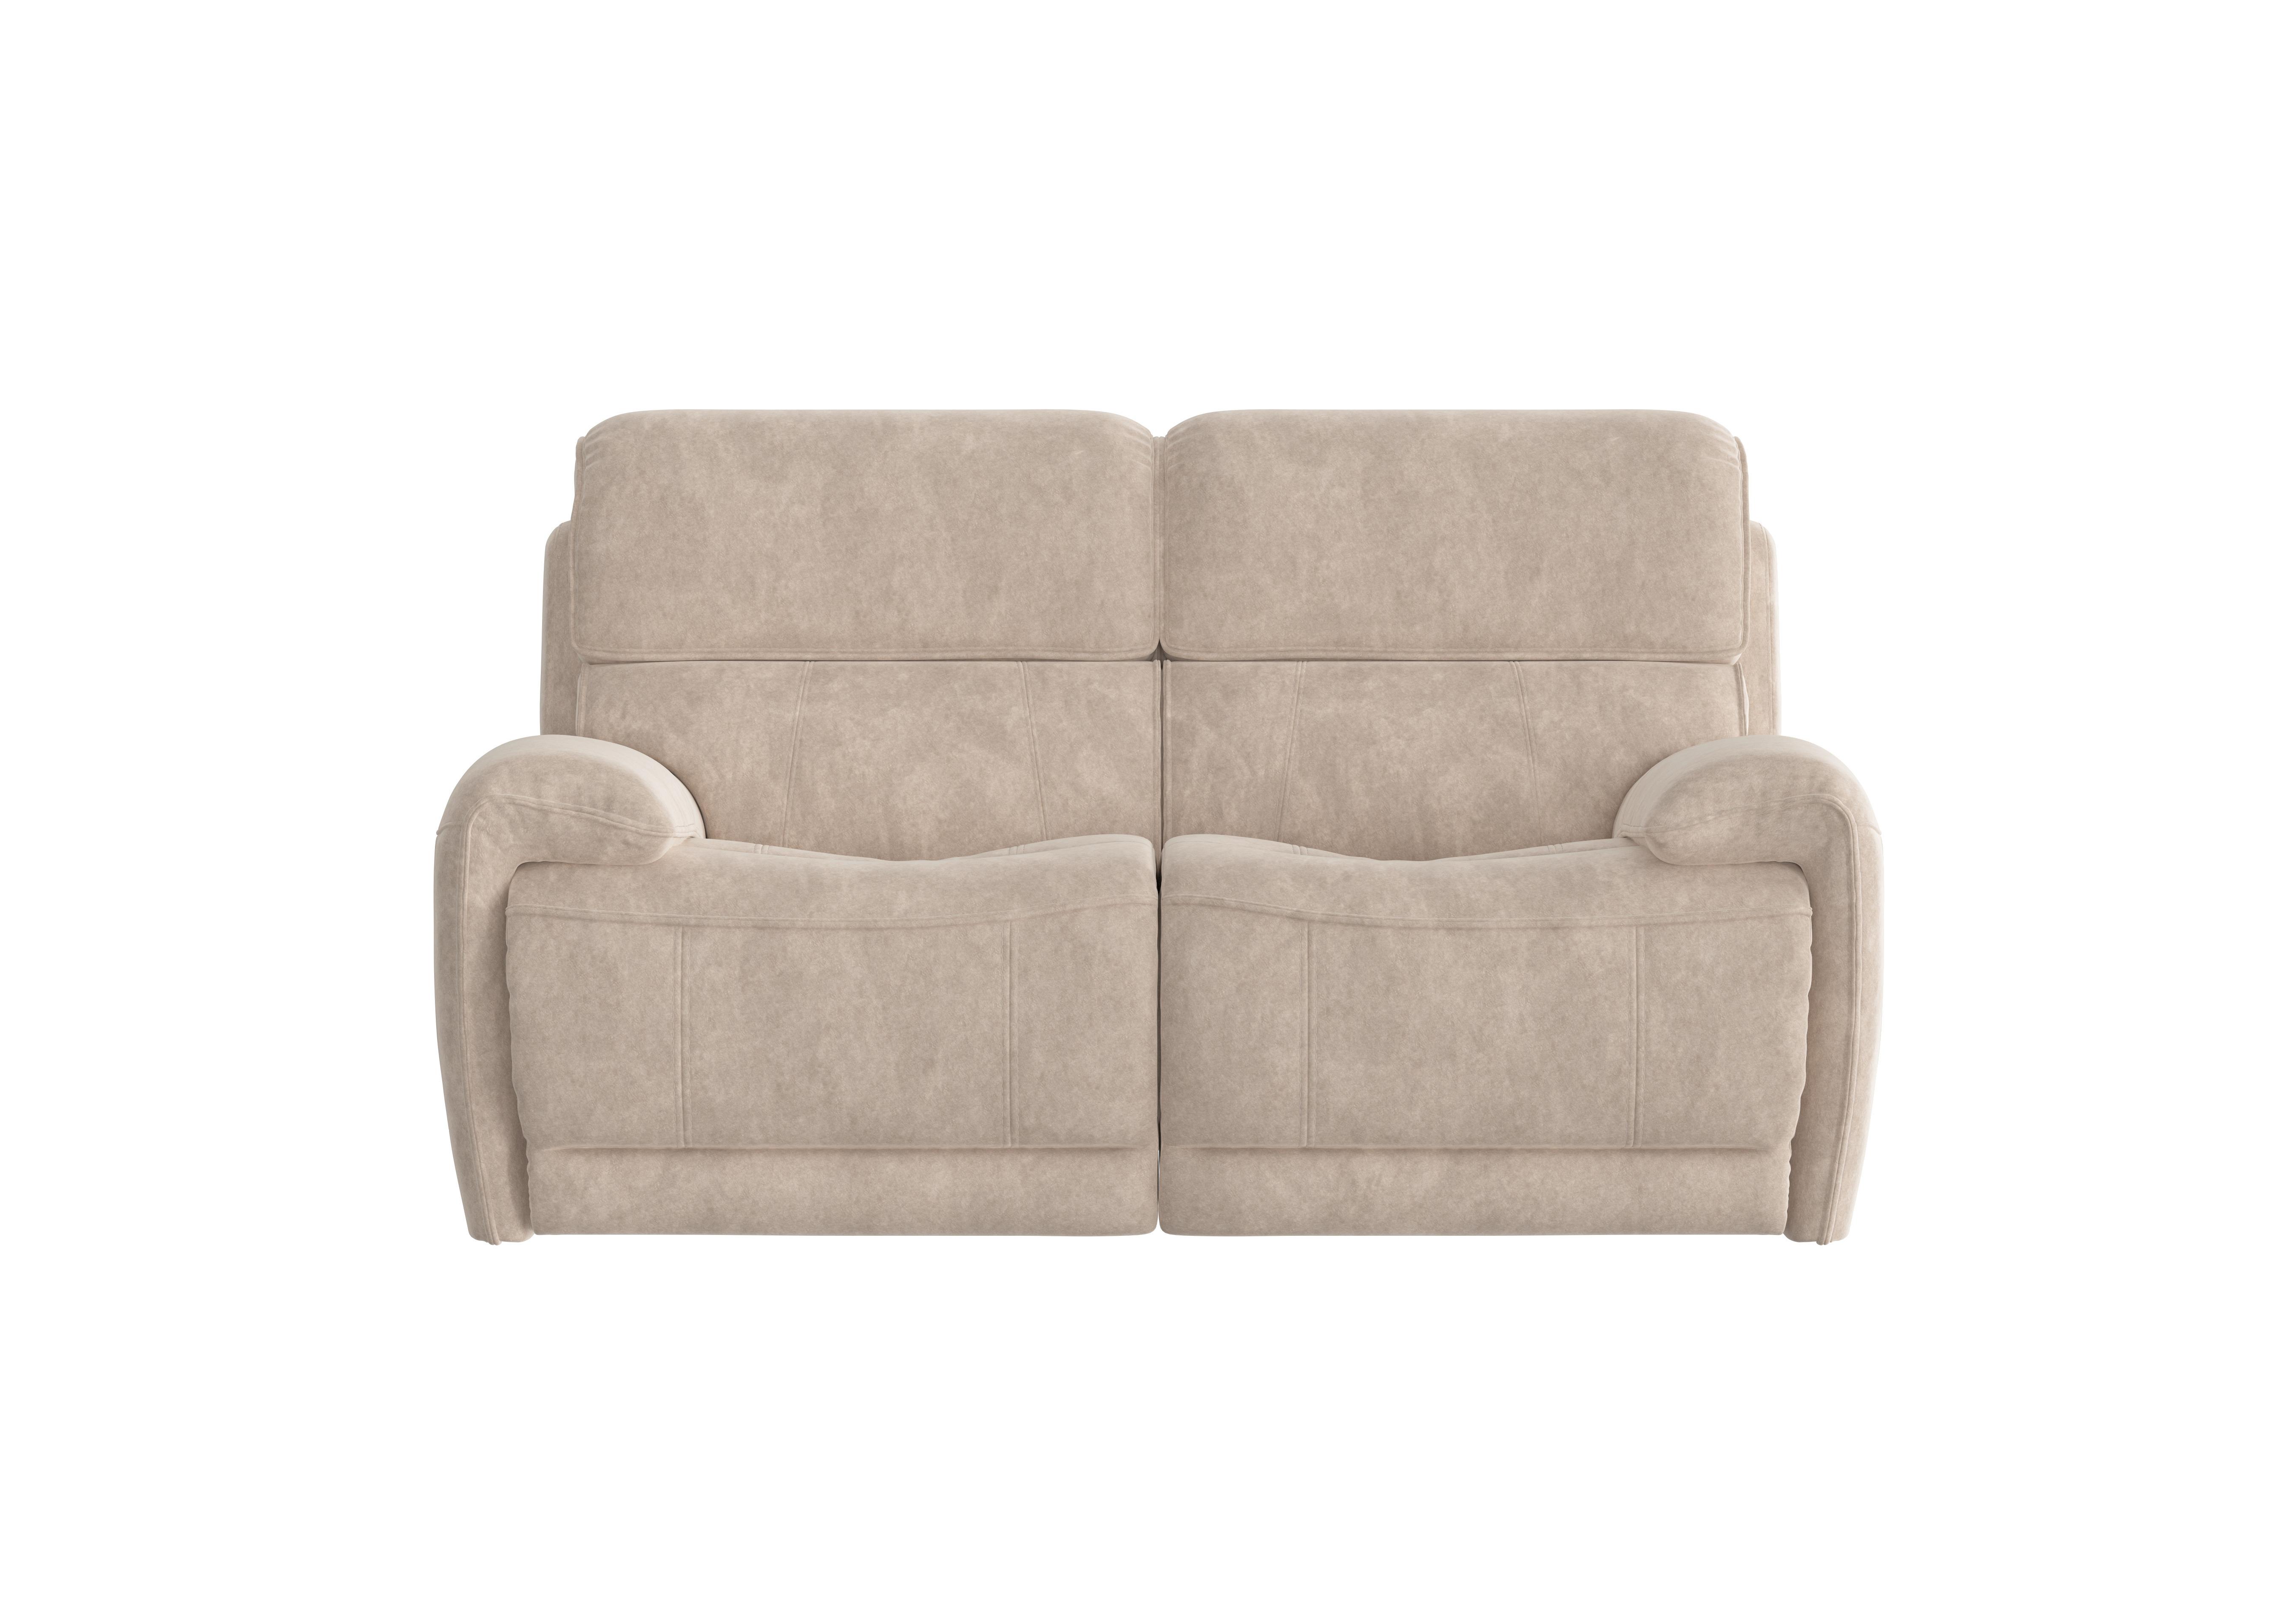 Link 2 Seater Fabric Power Recliner Sofa with Power Headrests in Bfa-Bnn-R26 Fv2 Cream on Furniture Village